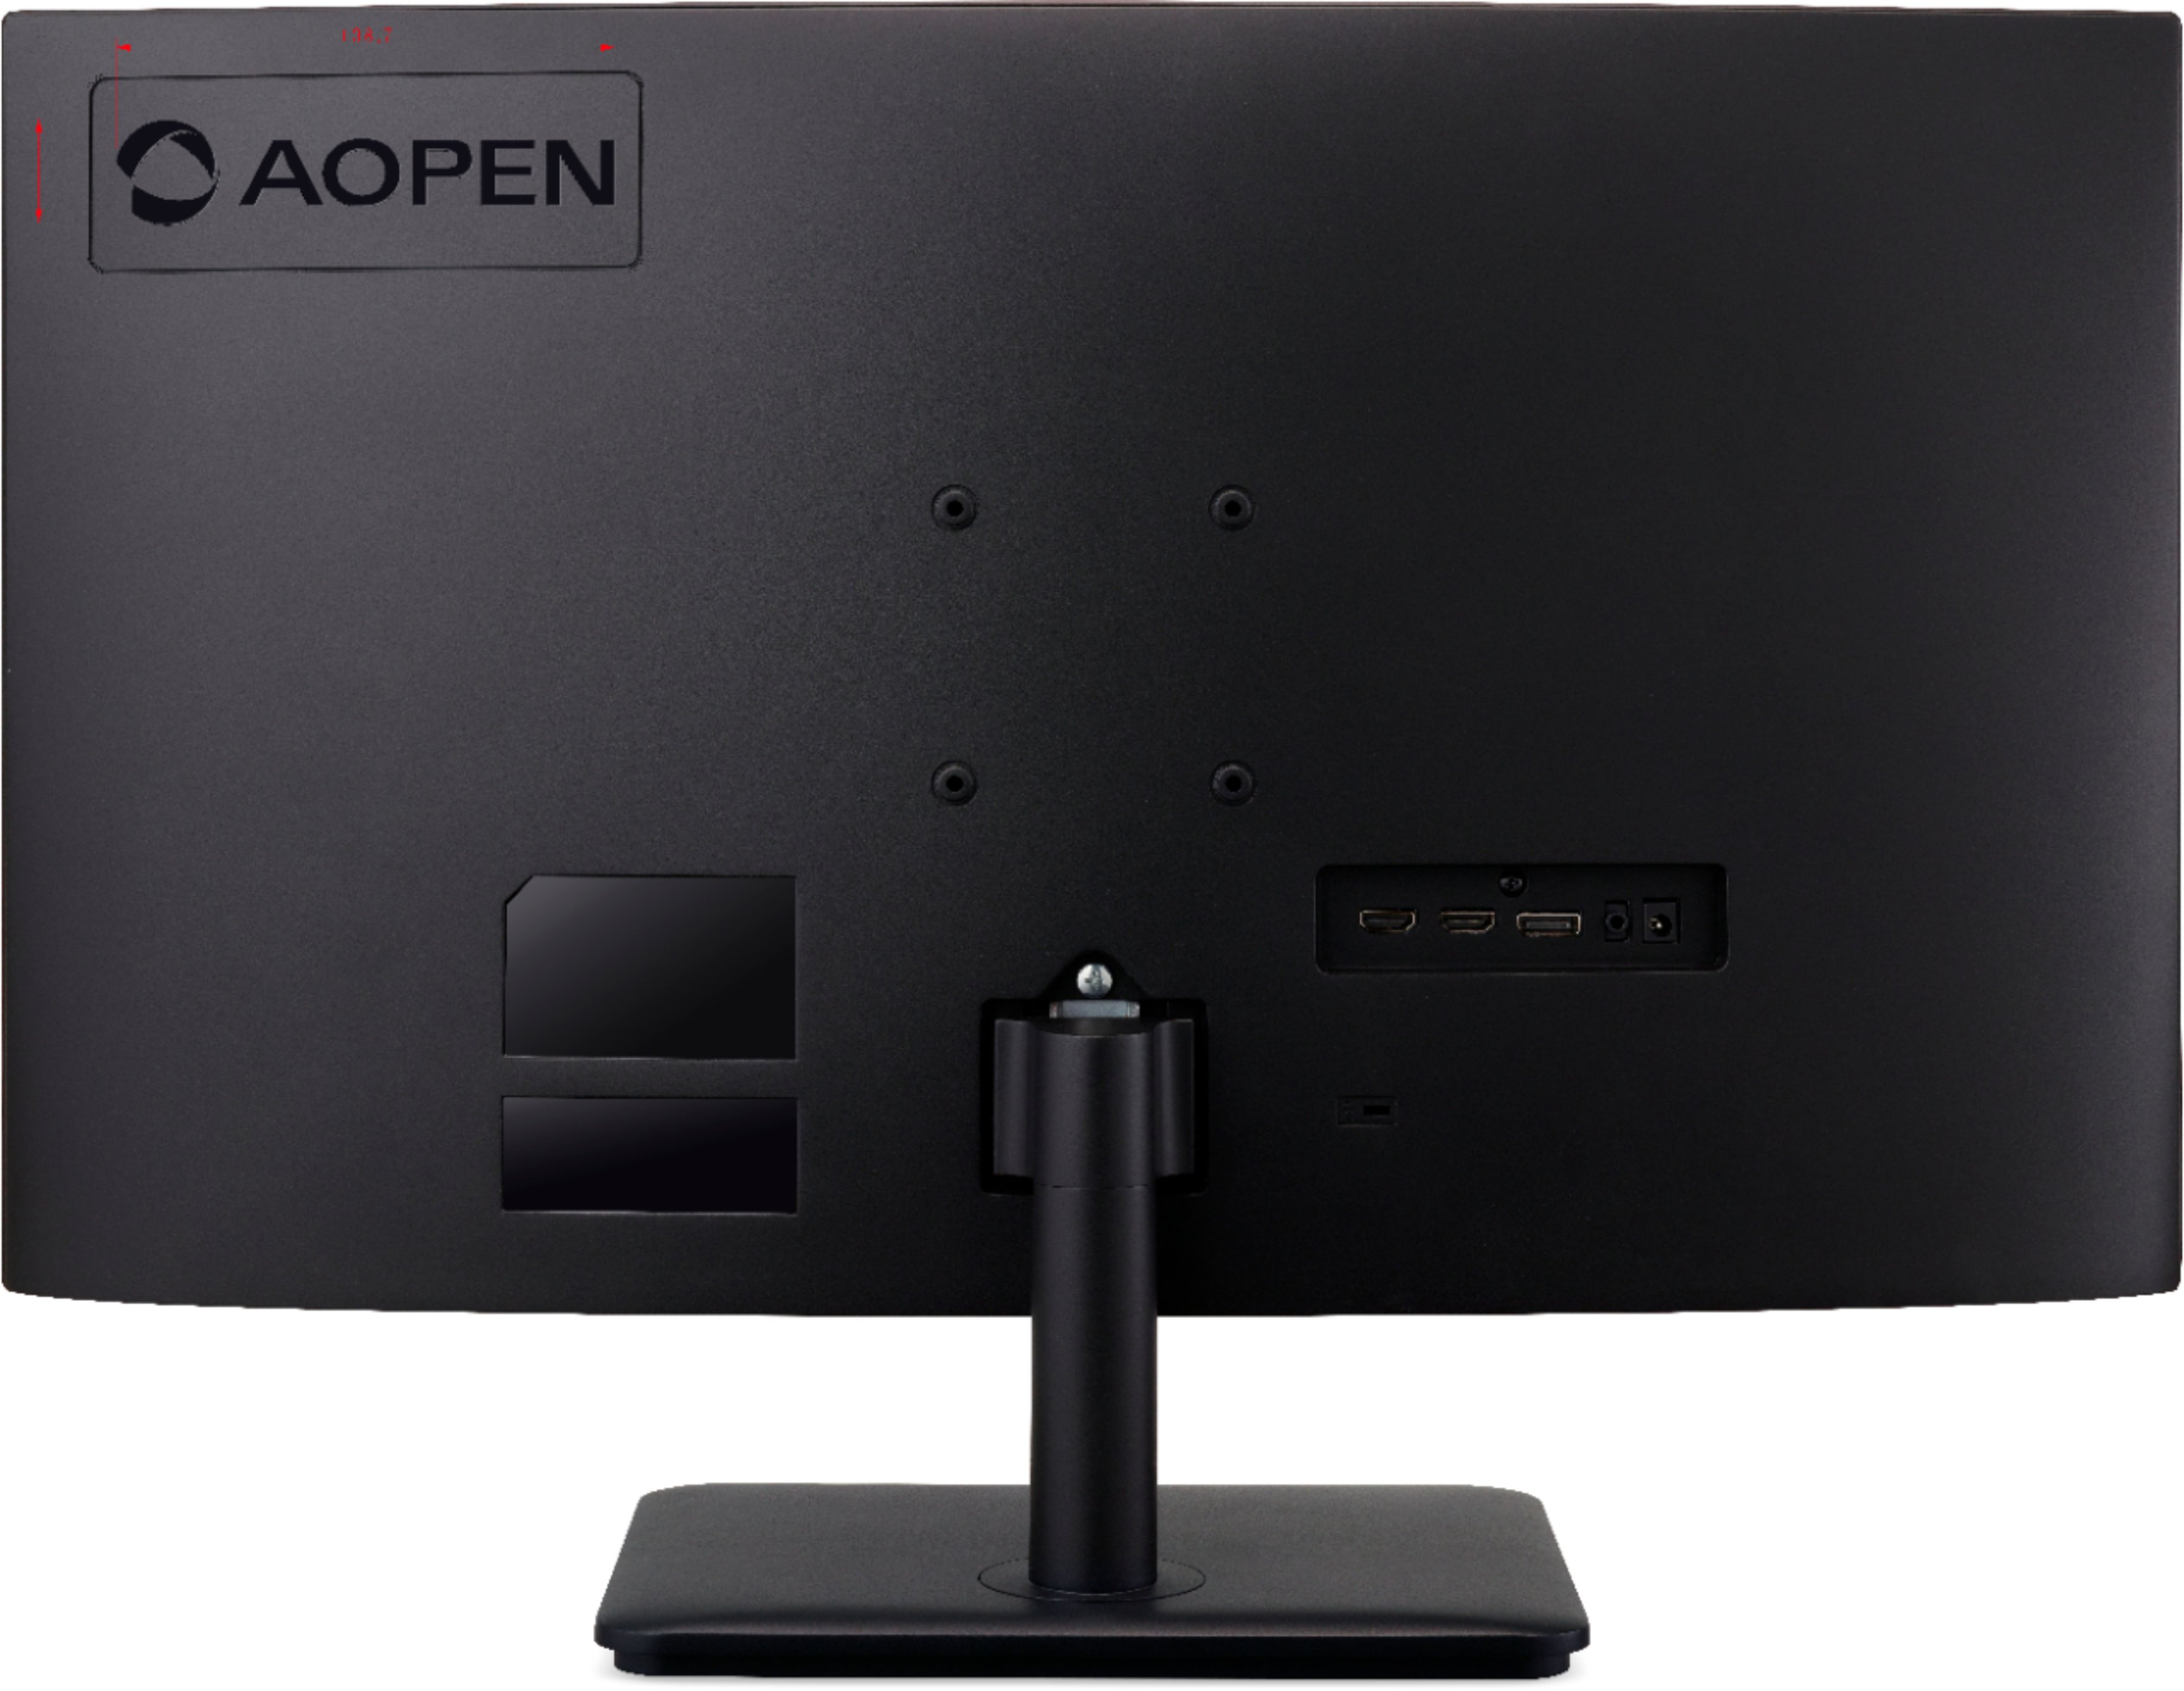 Back View: AOPEN 27HC5R 27” Curved FHD (1920 x 1080) with AMD FreeSync - 165Hz Monitor (Display Port & 2 x HDMI Ports)